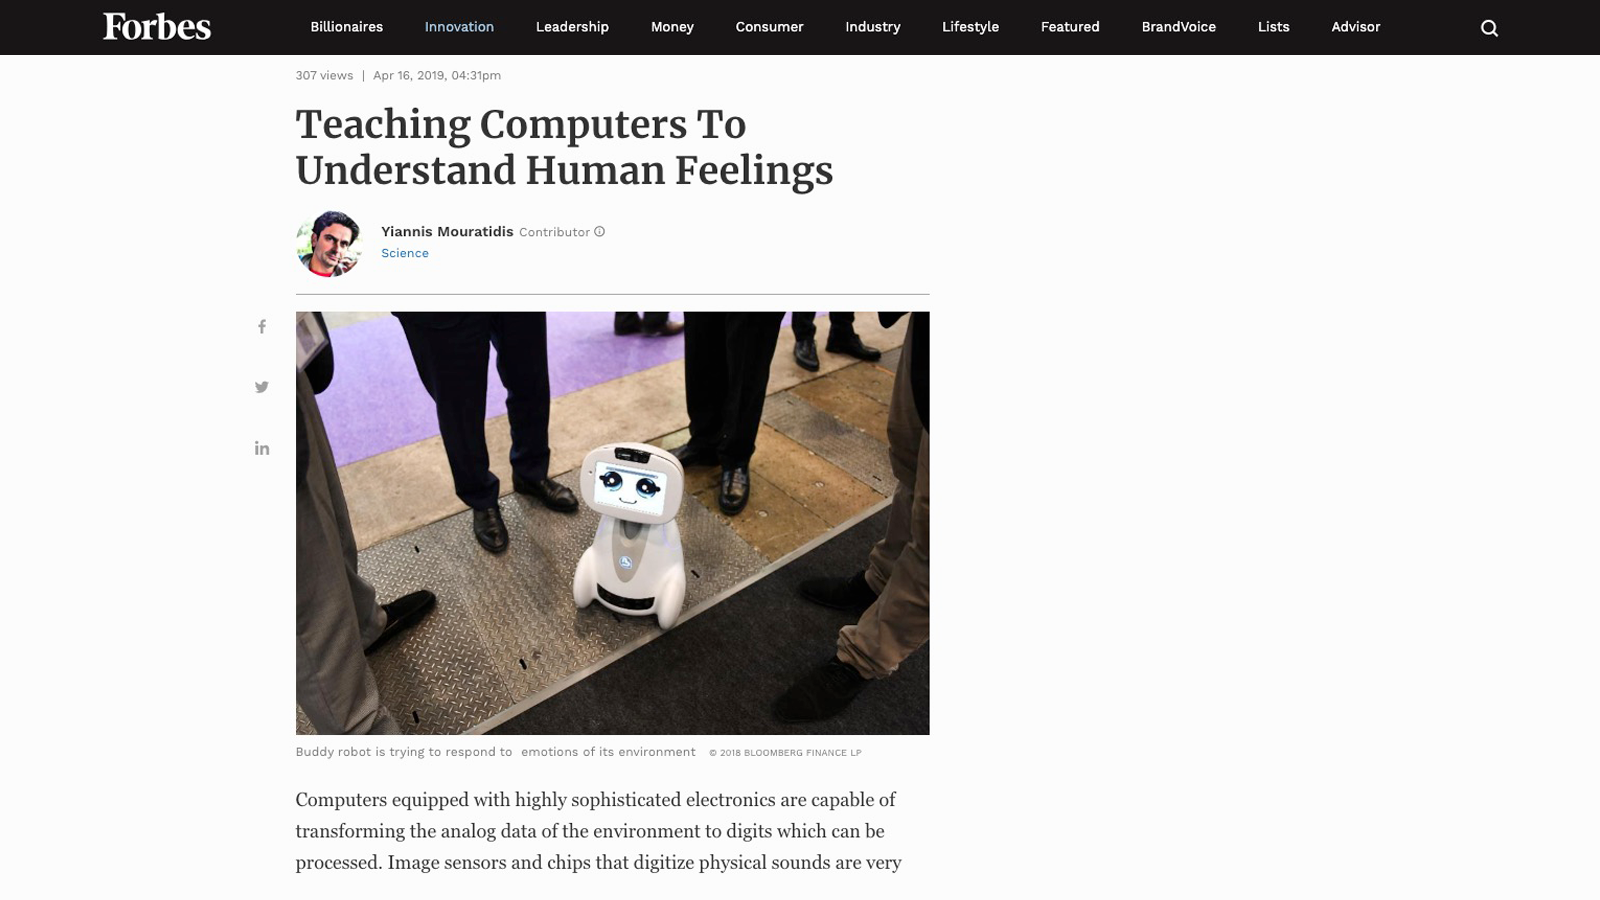 Behavioral Signals in Forbes - Teaching computers to understand human feelings